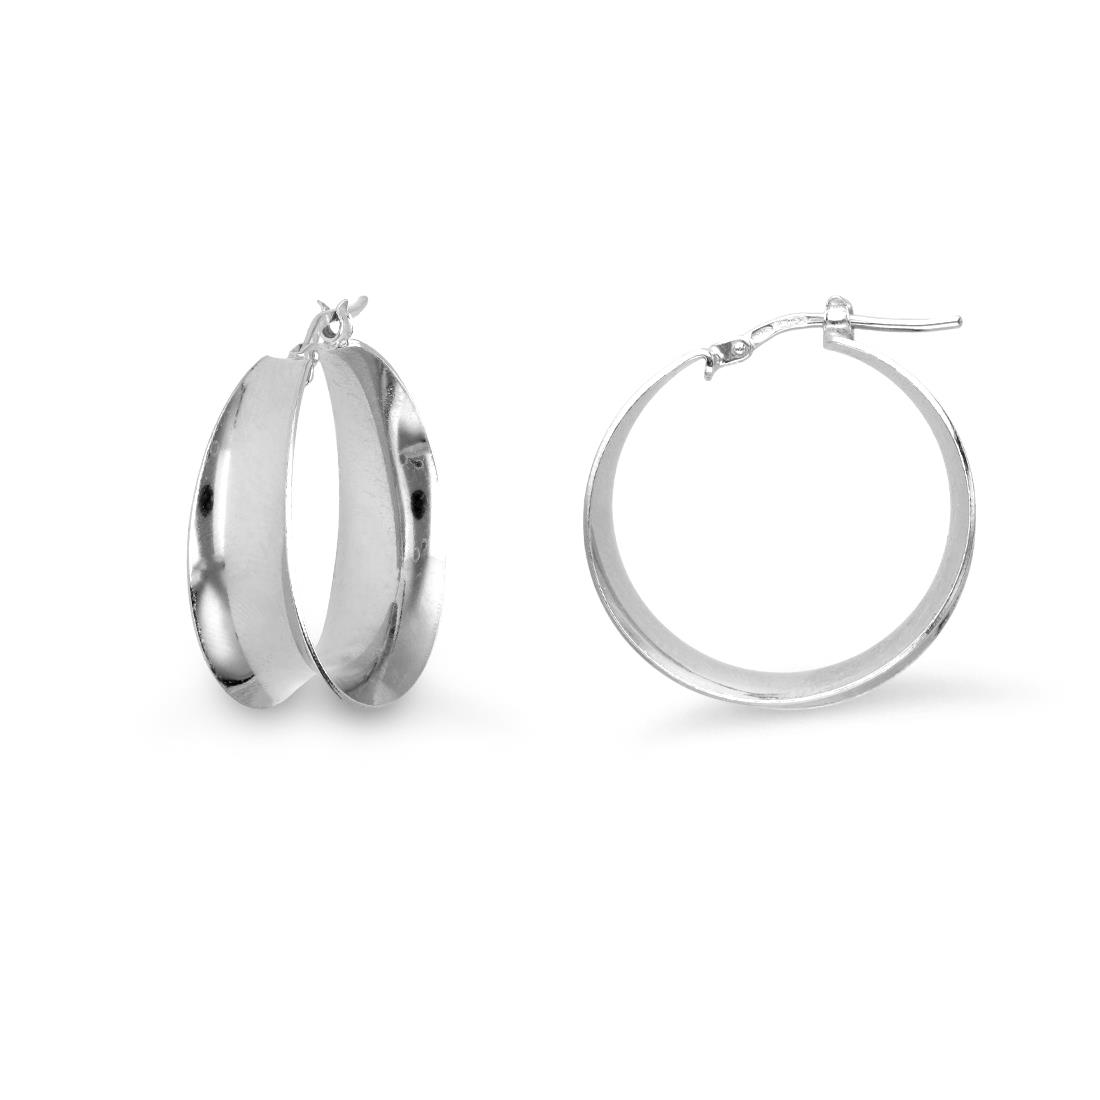 Thick hoop earrings from the Hula Hoop collection in 925 rhodium-plated silver - LUXURY MILANO